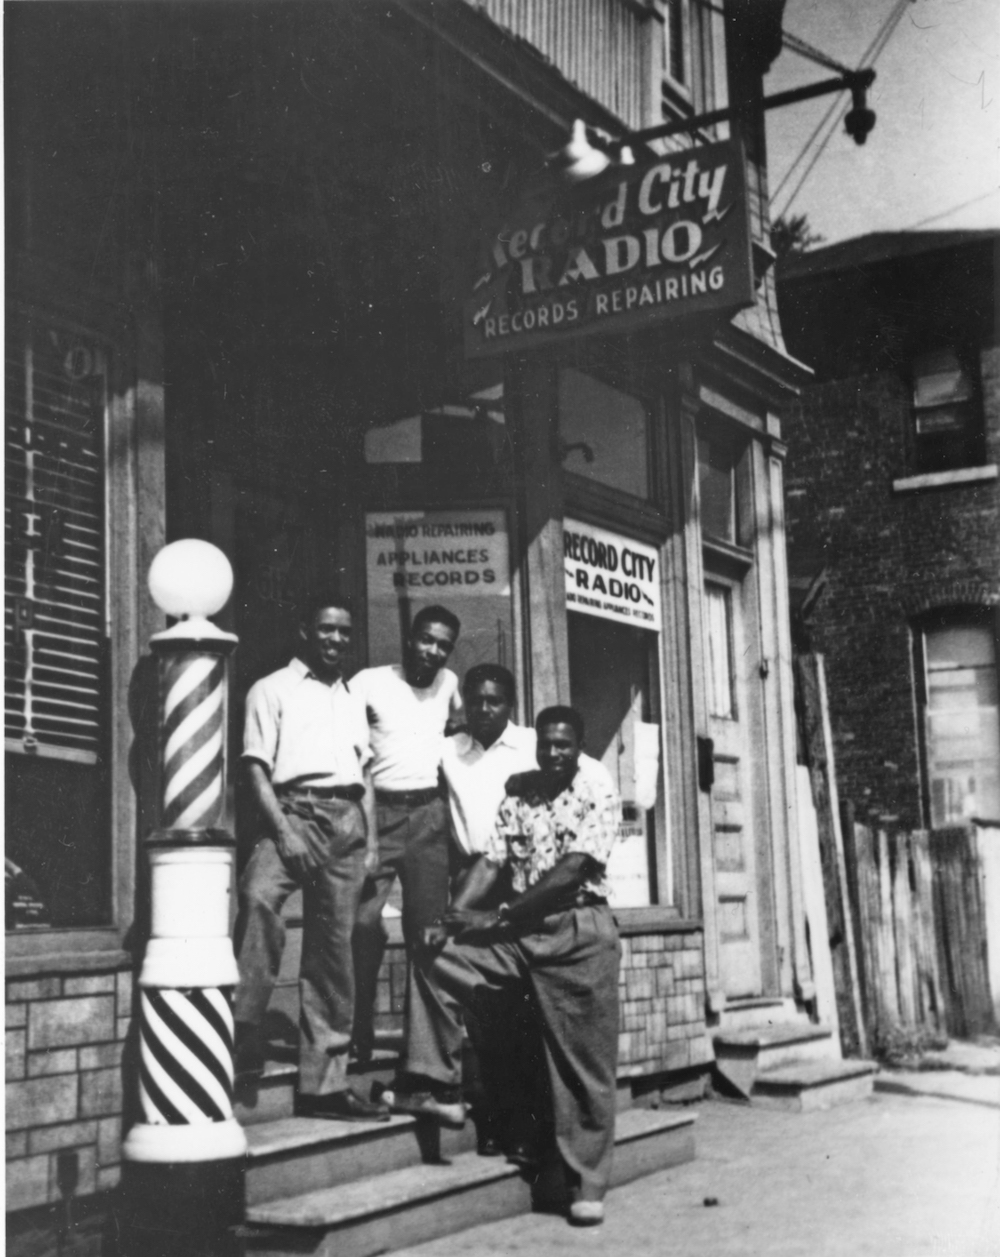 Four men stand together on the steps in front of a barbershop. The sign to the shop next door reads “Record City Radio Records Repairing.”